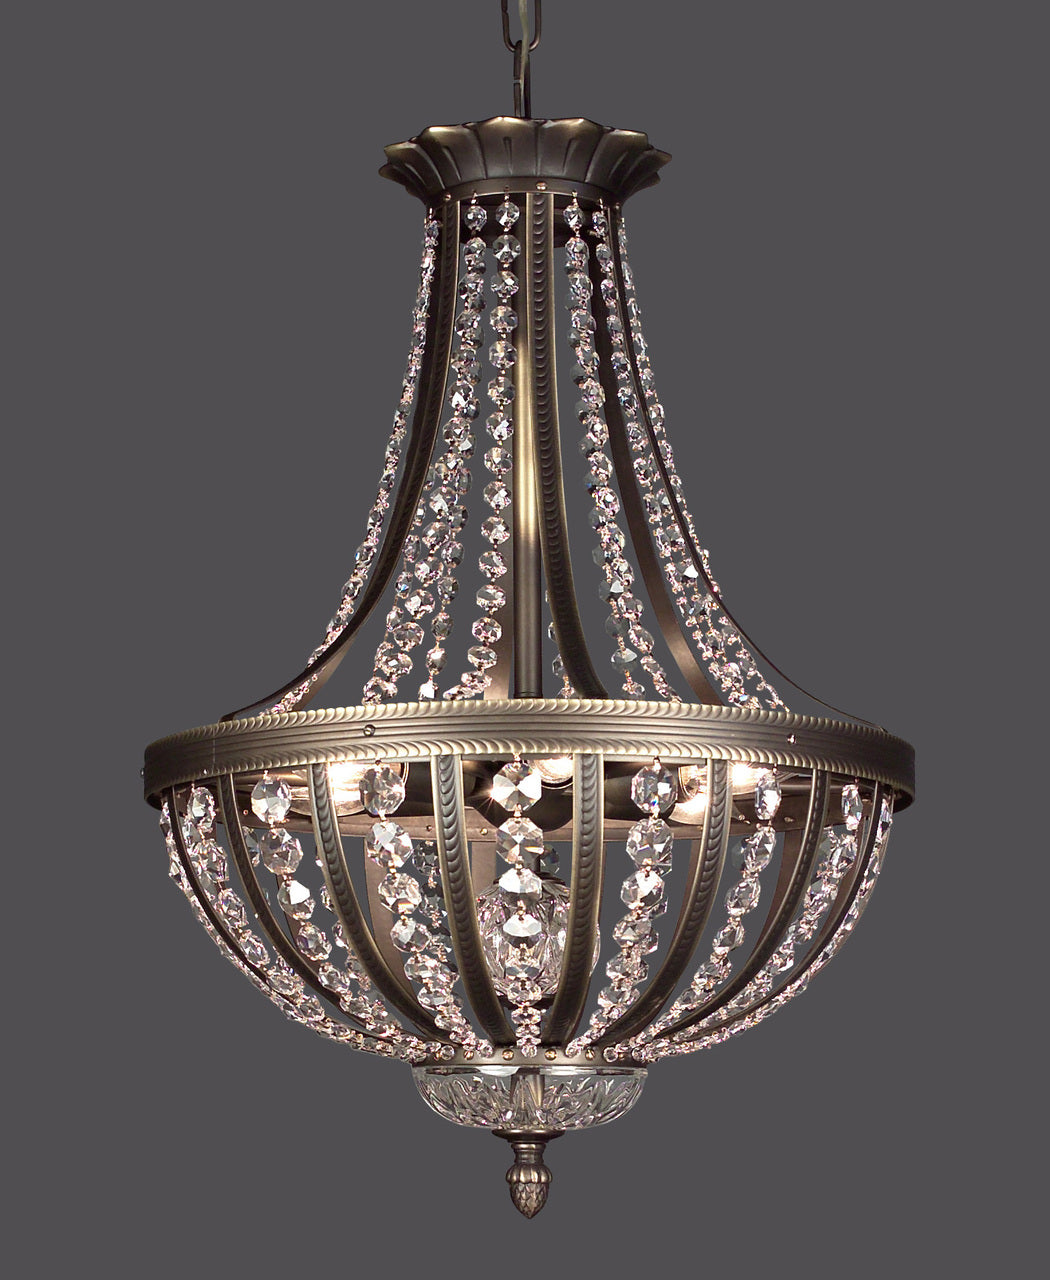 Classic Lighting 1924 RB S Terragona Crystal Pendant in Roman Bronze (Imported from Spain)